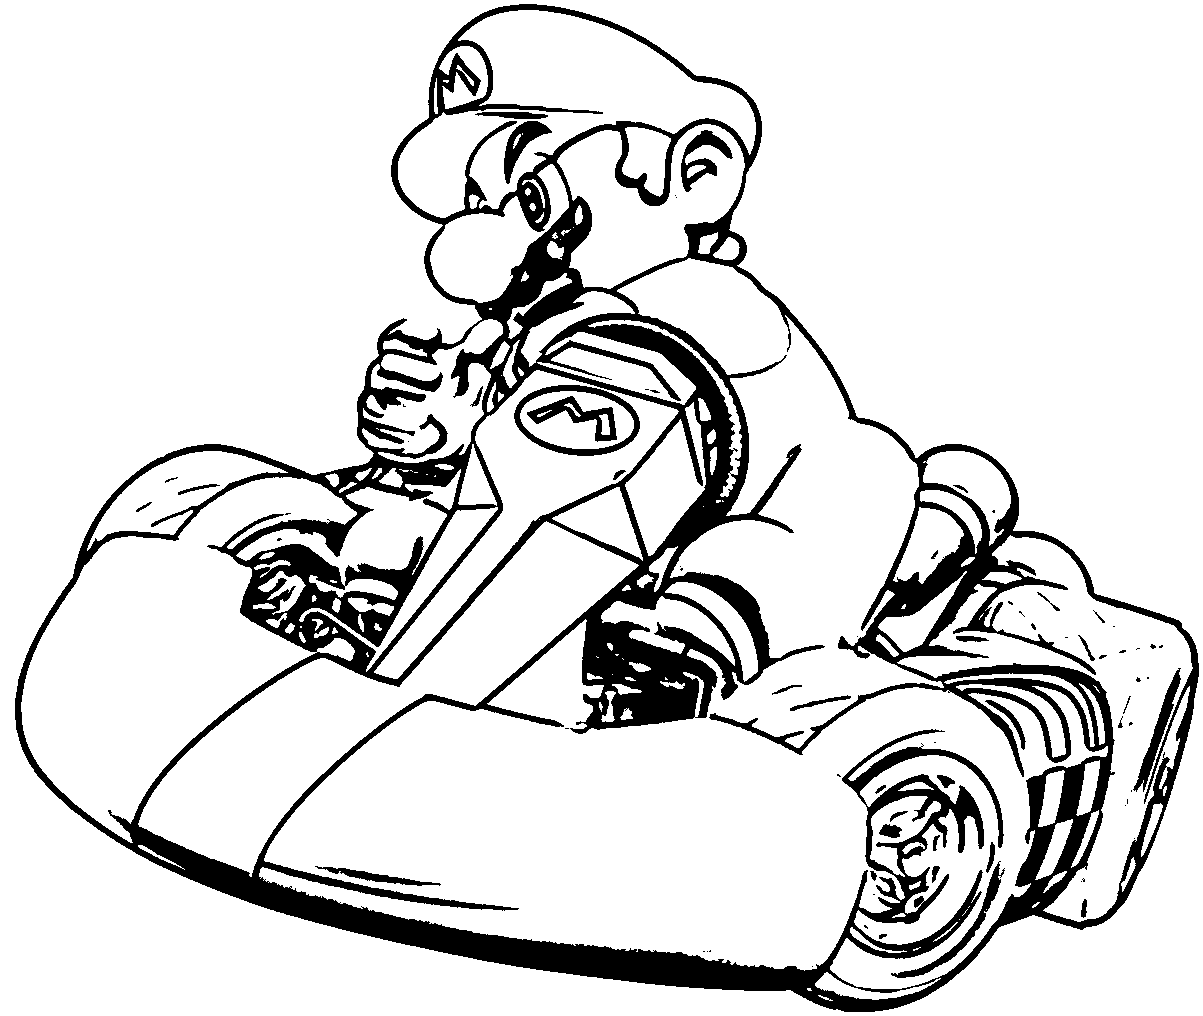 coloring pages of mario kart wii jimbo39s coloring pages mario kart wii coloring pages pages kart wii coloring mario of 